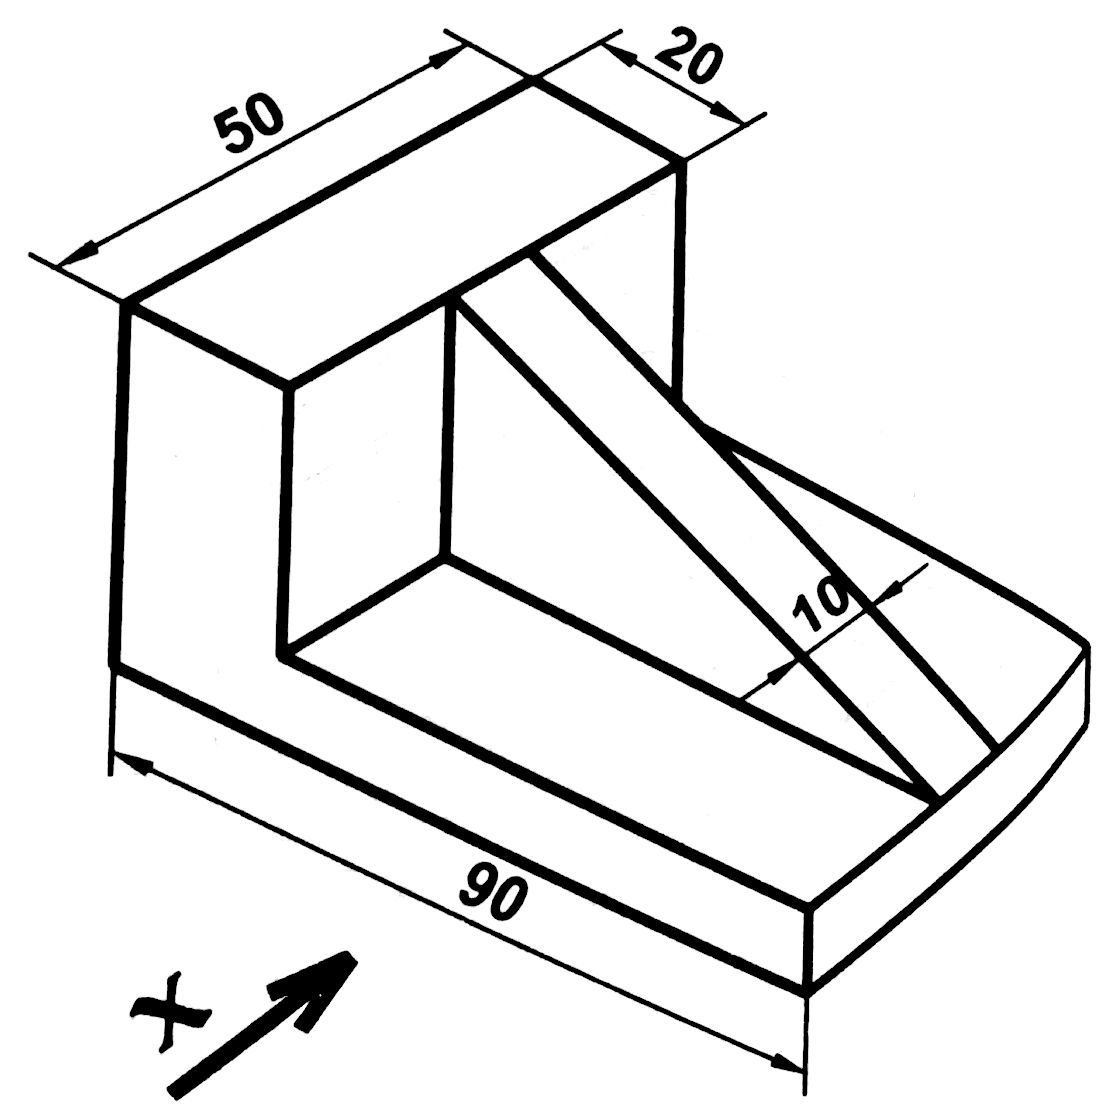 Orthographic Projection, Drawing: A Comprehensive Guide.